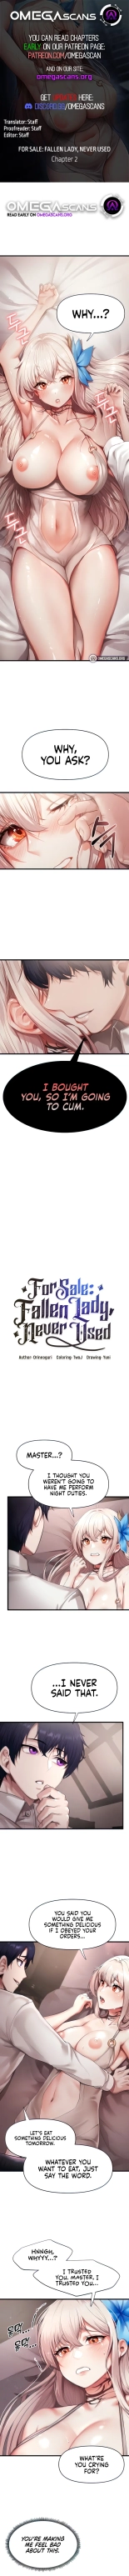 For Sale: Fallen Lady, Never Used : página 12